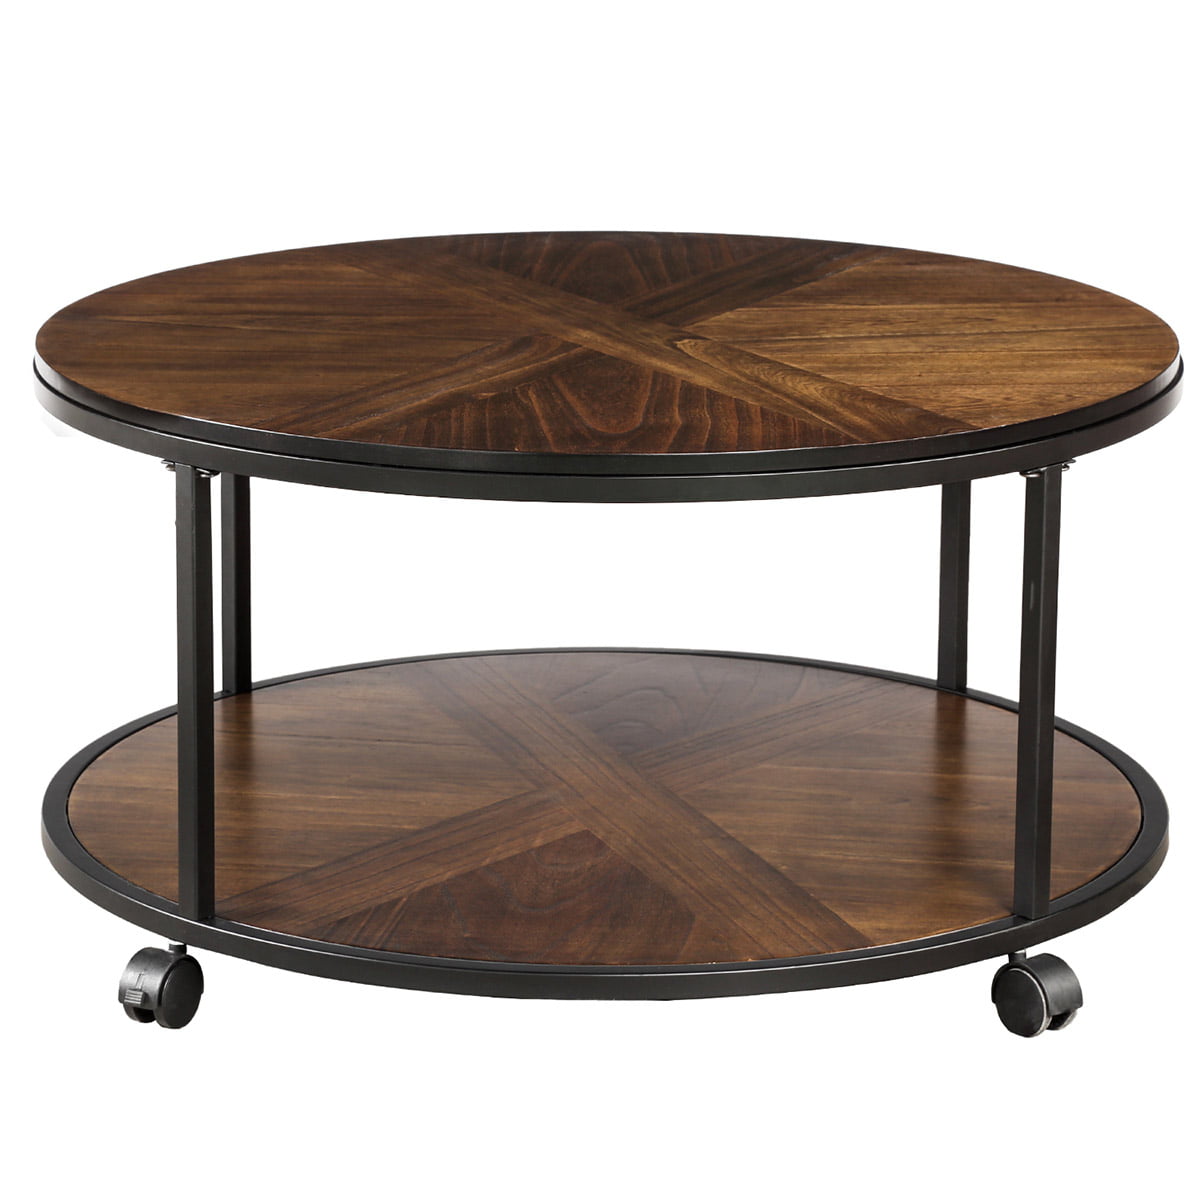 KAWELL Round Coffee Table with Caster Wheels and Unique Textured